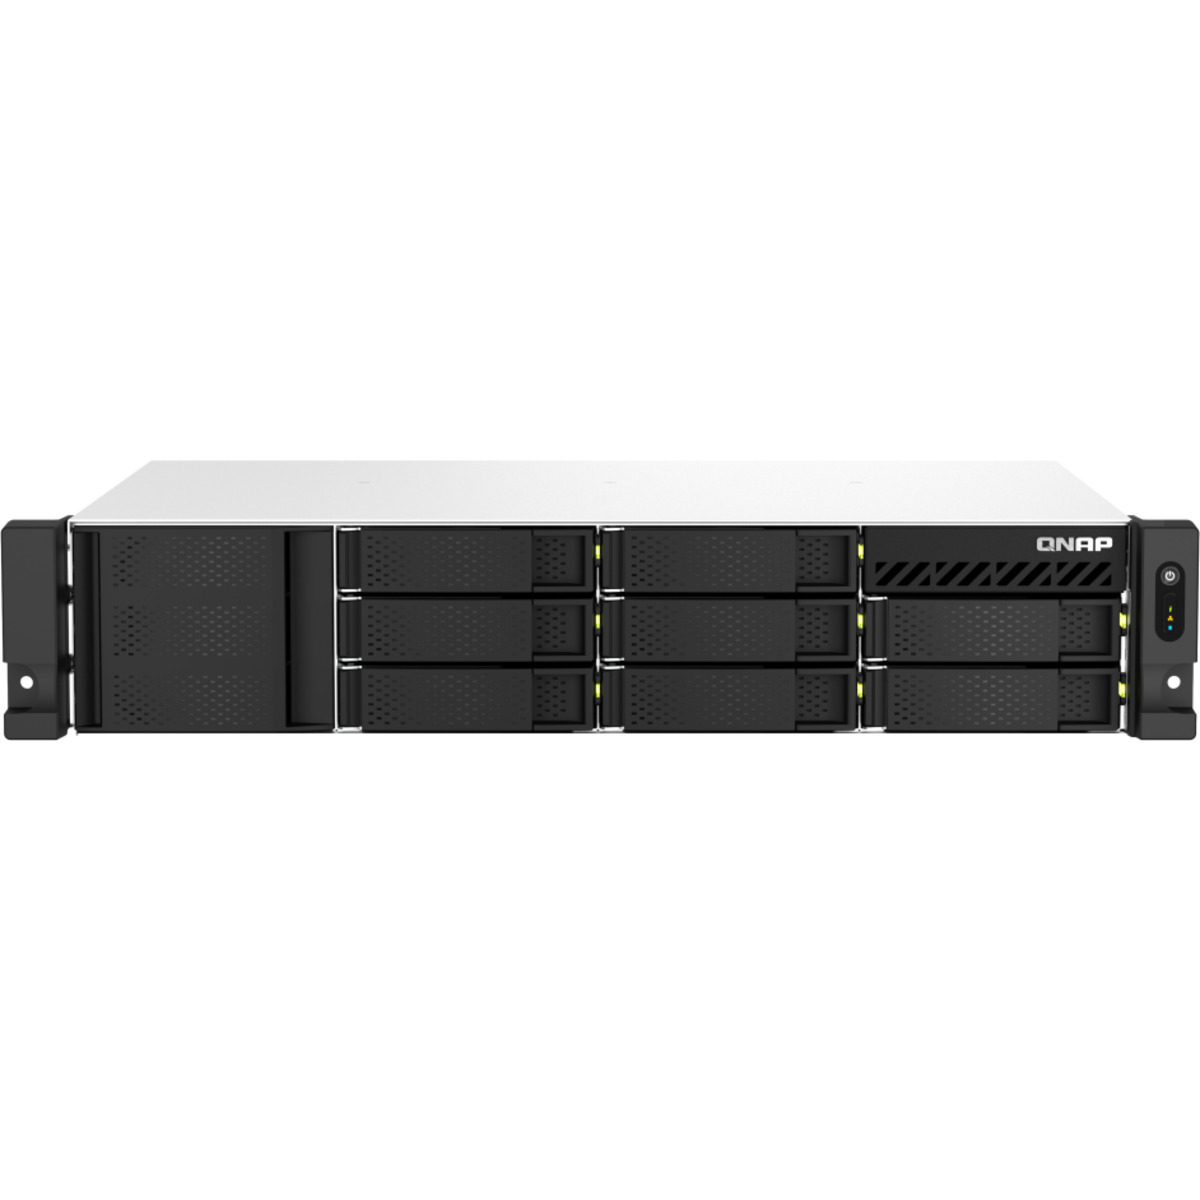 buy $2515 QNAP TS-873AeU-RP 32tb RackMount NAS - Network Attached Storage Device 8x4000gb Toshiba MN Series MN08ADA400E 3.5 7200rpm SATA 6Gb/s HDD NAS Class Drives Installed - Burn-In Tested - ON SALE - FREE RAM UPGRADE - nas headquarters buy network attached storage server device das new raid-5 free shipping simply usa TS-873AeU-RP